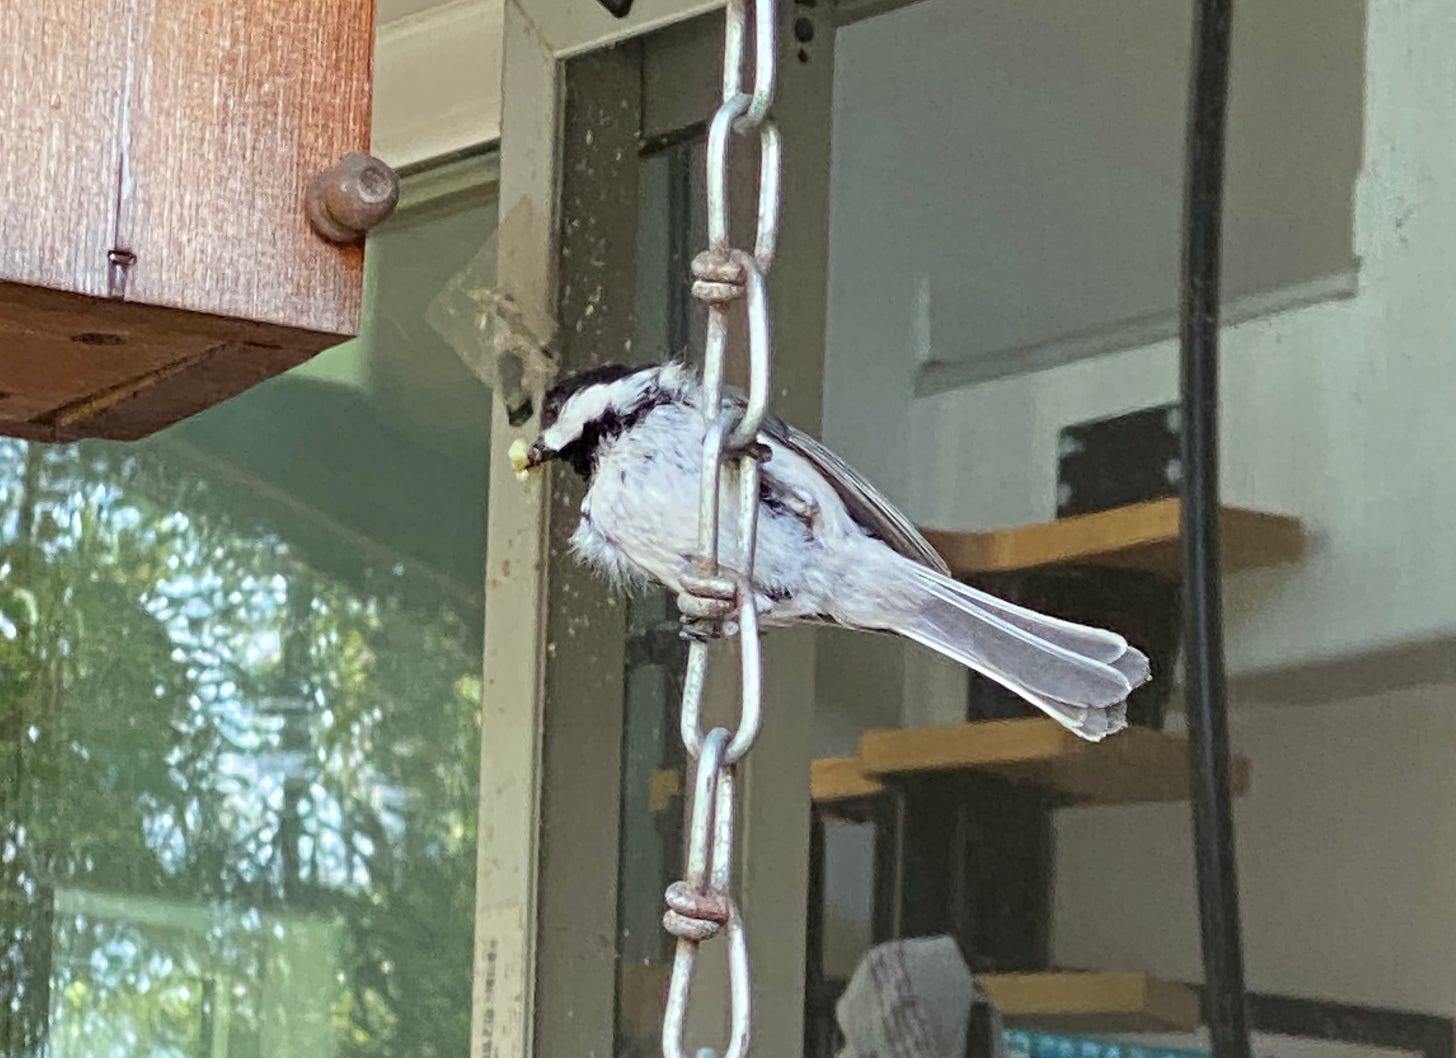 A black-capped chickadee holding what looks like a green grub, ready to deliver it to the chicks waiting inside a nearby birdhouse.